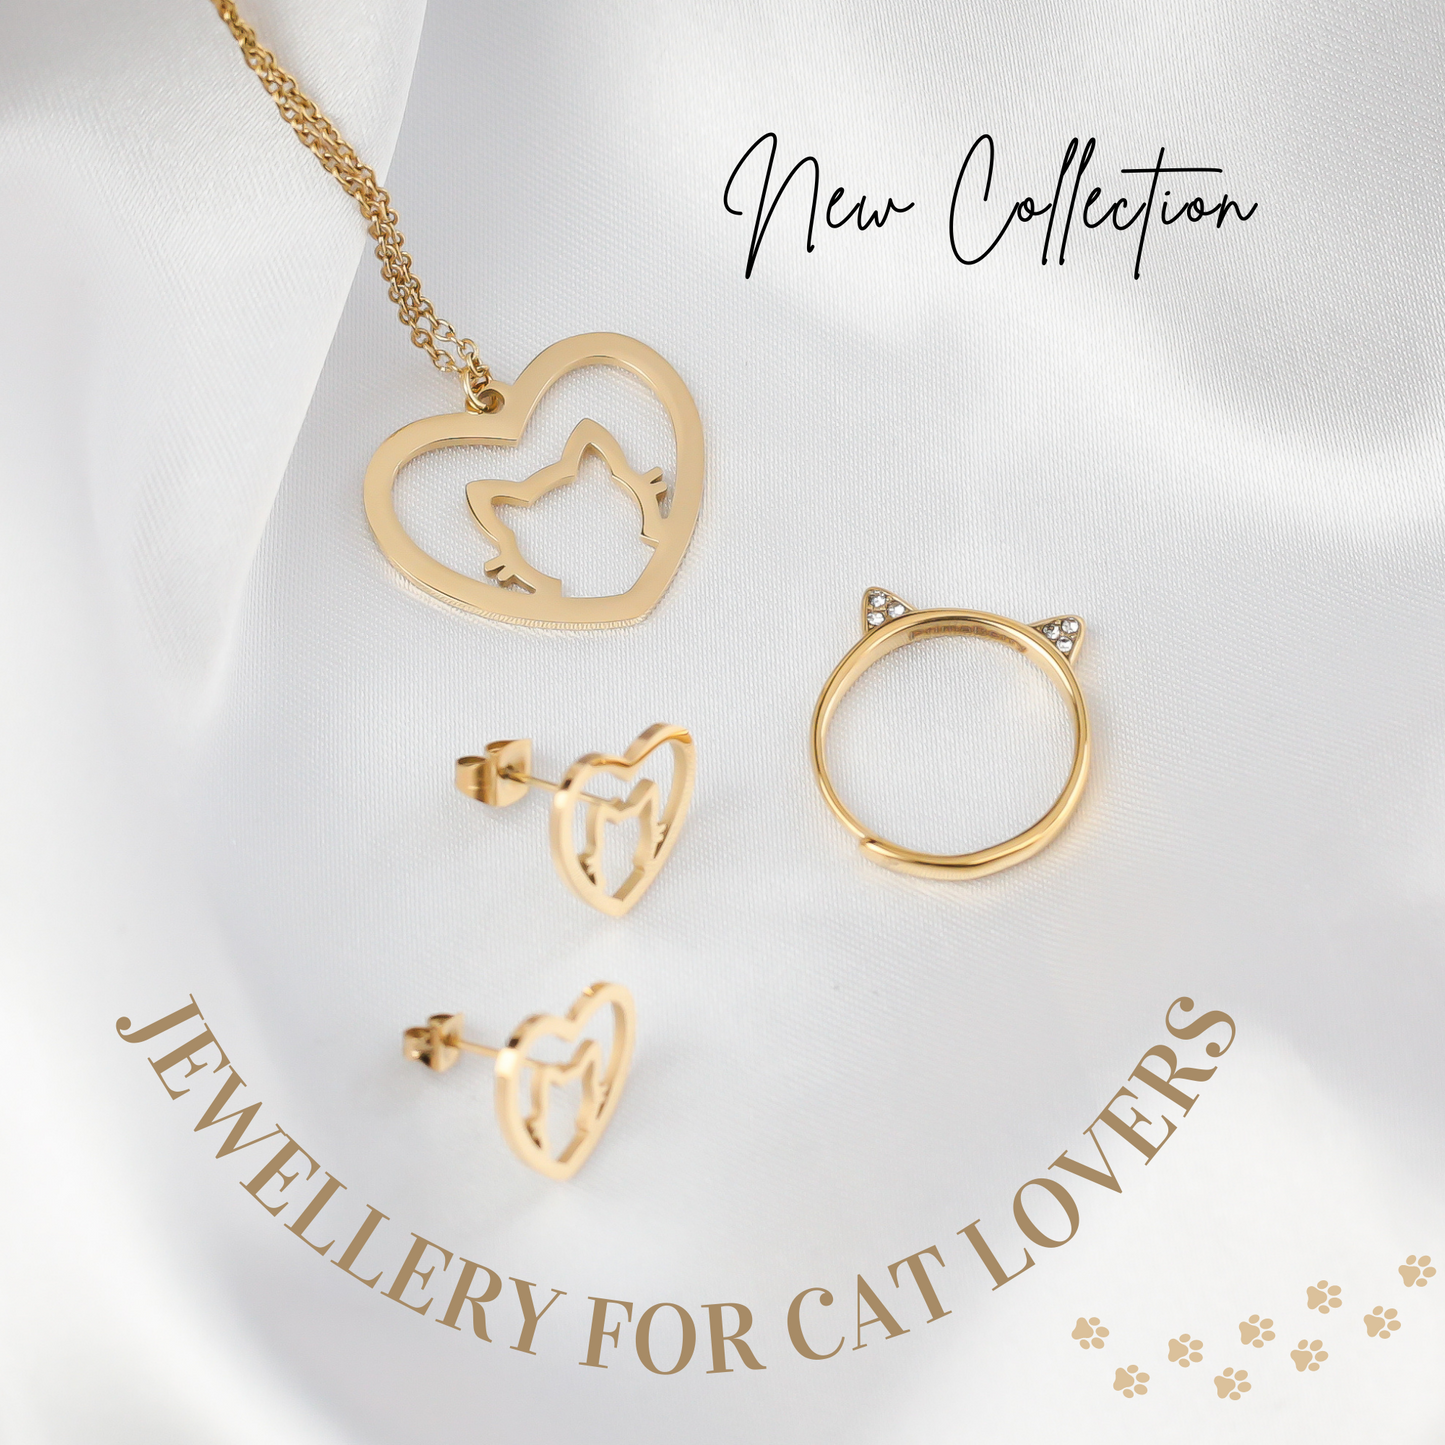 Cat Necklace: A Cute and Unique Gift for Cat Lovers